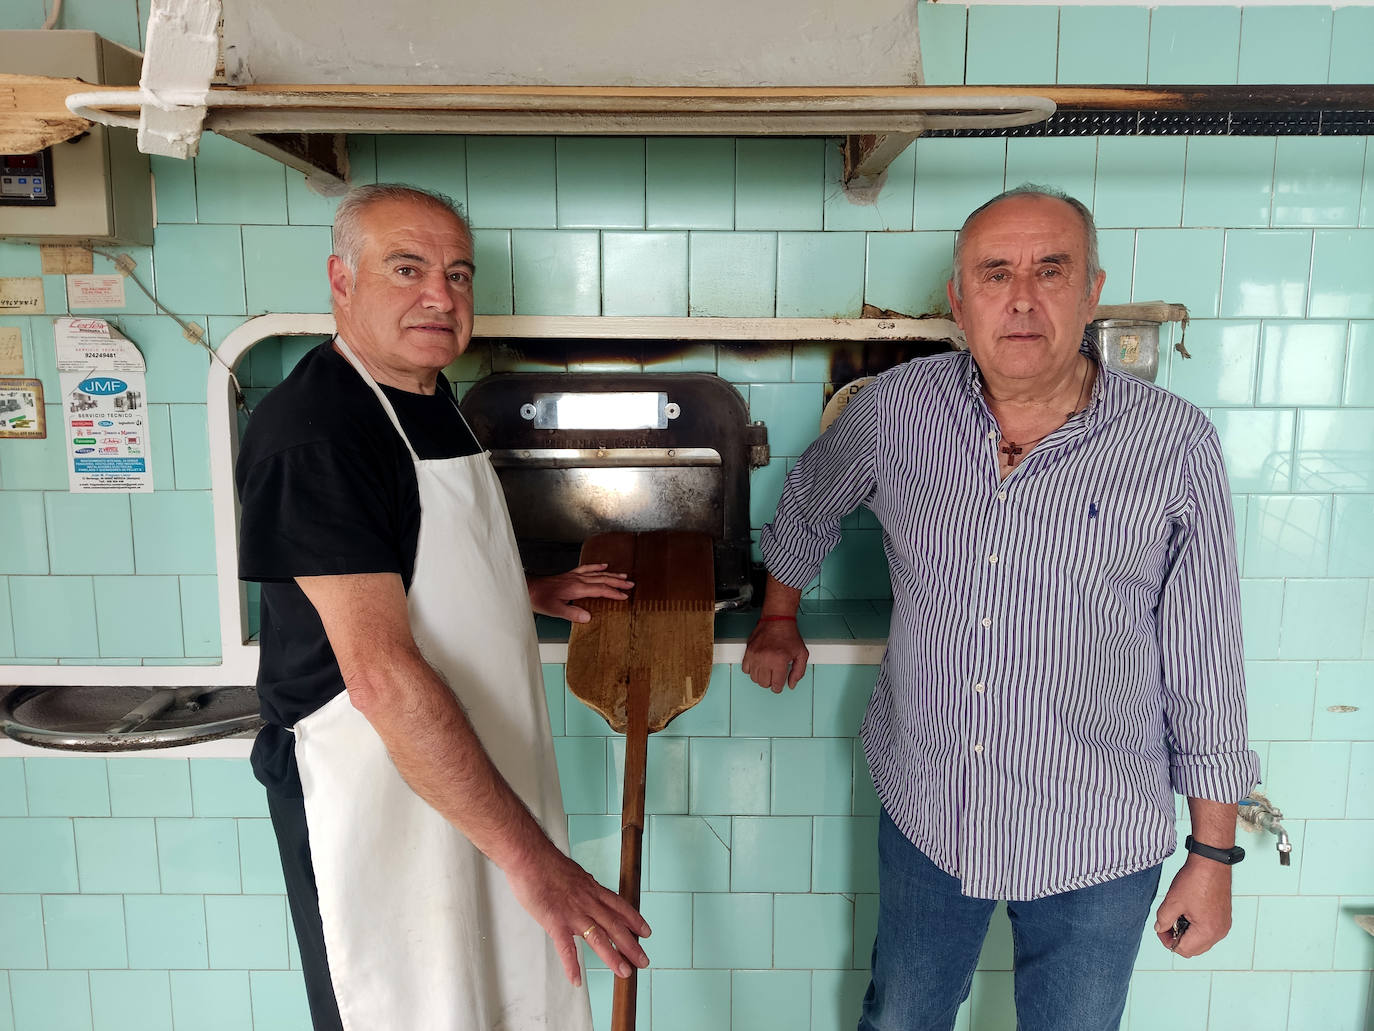 Interview with Fabián Lavado Porro, 49 years working at the Lavado Bakery